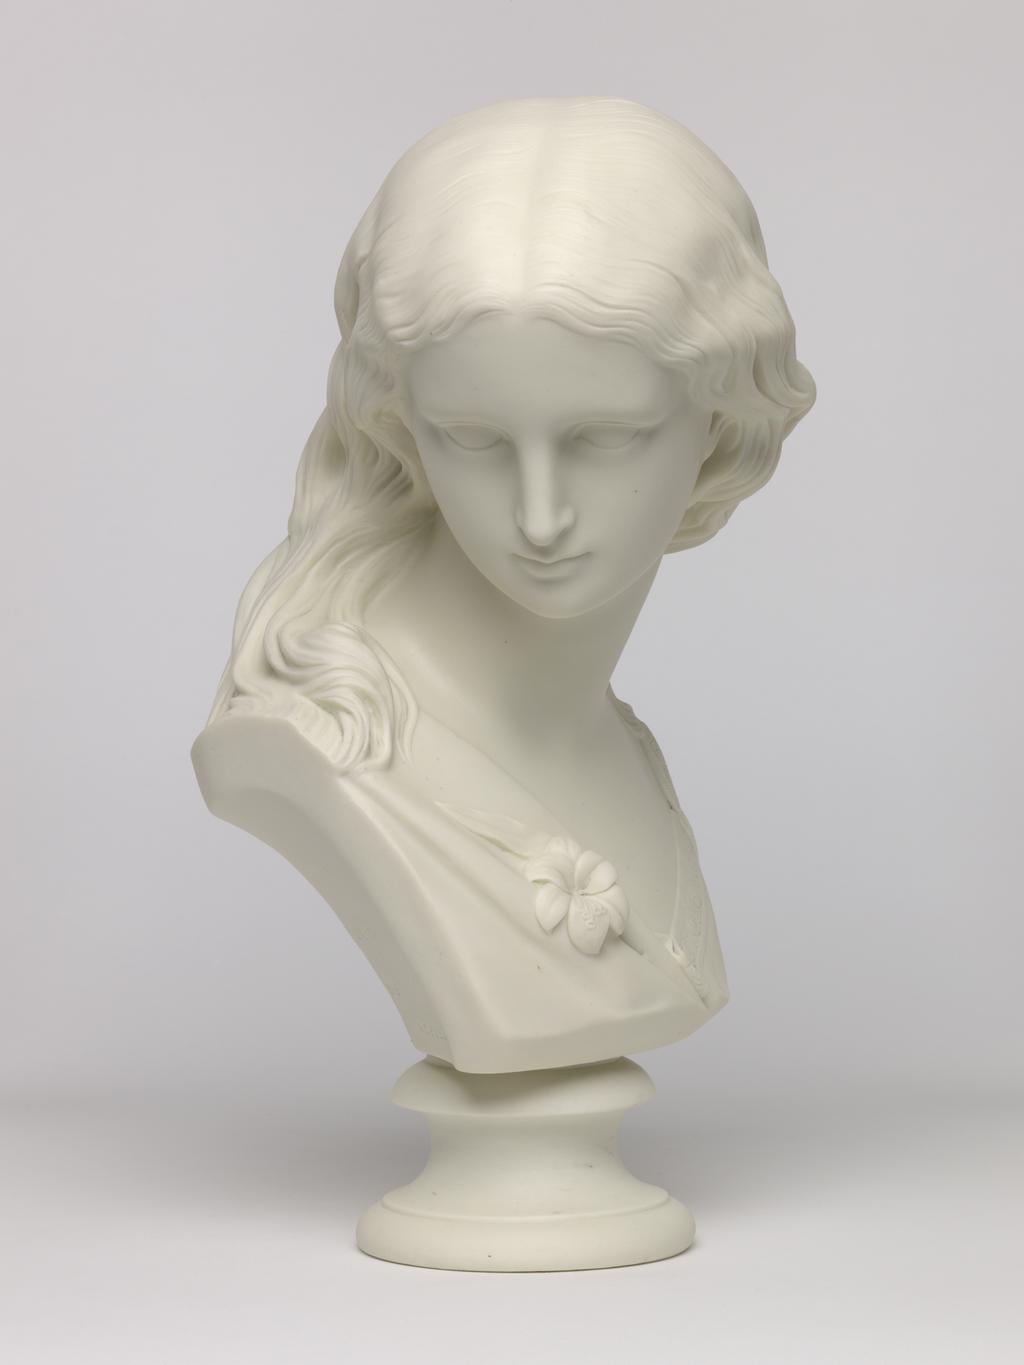 An image of Bust. Purity. Copeland, England, Staffordshire, Stoke-on-Trent. Noble, Matthew, sculptor (British, 1818-1876). Crystal Palace Art Union, distributor, England. Inscription: Maker's name; reverse of bust; marked; CERAMIC AND CRYSTAL PALACE ART UNION PUB. NOVEMBER 1869 COPYRIGHT RESERVED COPELAND L M. NOBLE SC. Parian (porcelain), slip-cast, height, 32.4 cm, length, 18.8 cm, width, 17.5 cm, length, base, 9.8 cm, 1869. Acquisition Credit: Accepted by H. M. Government in lieu of Inheritance Tax from the estate of G. D. V. Glynn, and allocated to the Fitzwilliam Museum.